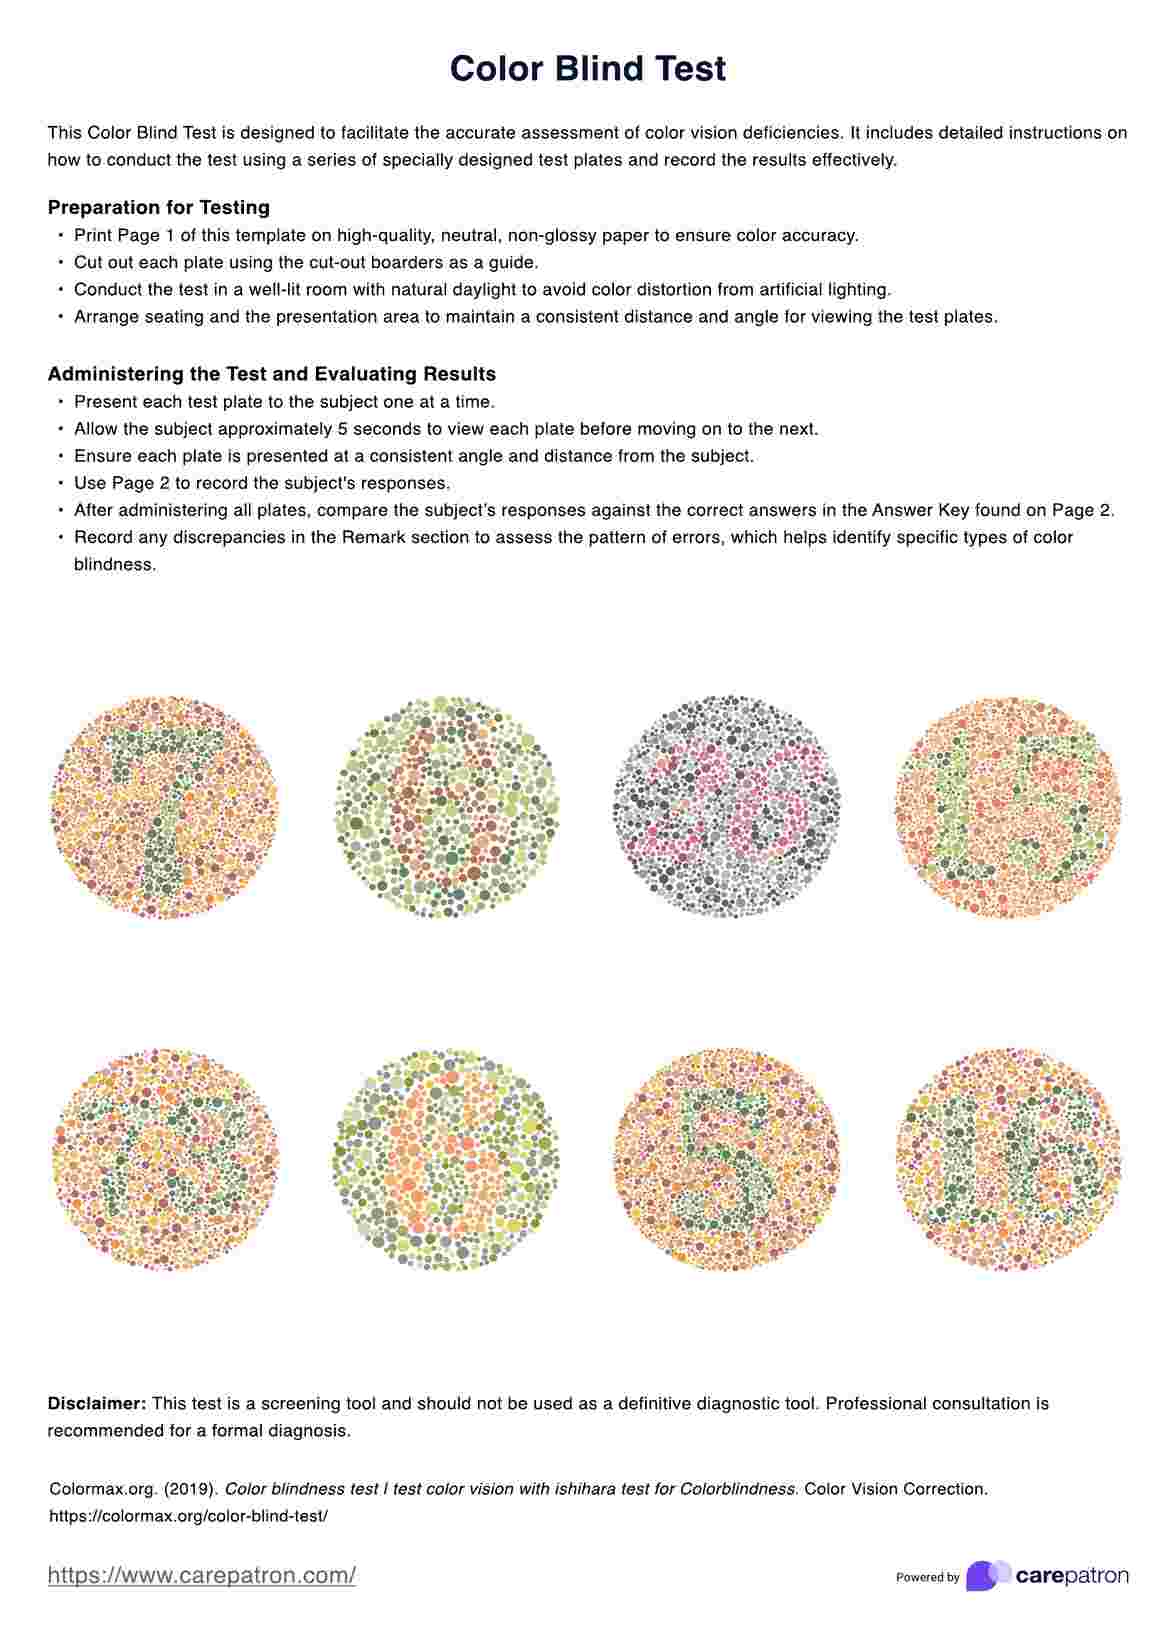 Color Blind Test PDF Example